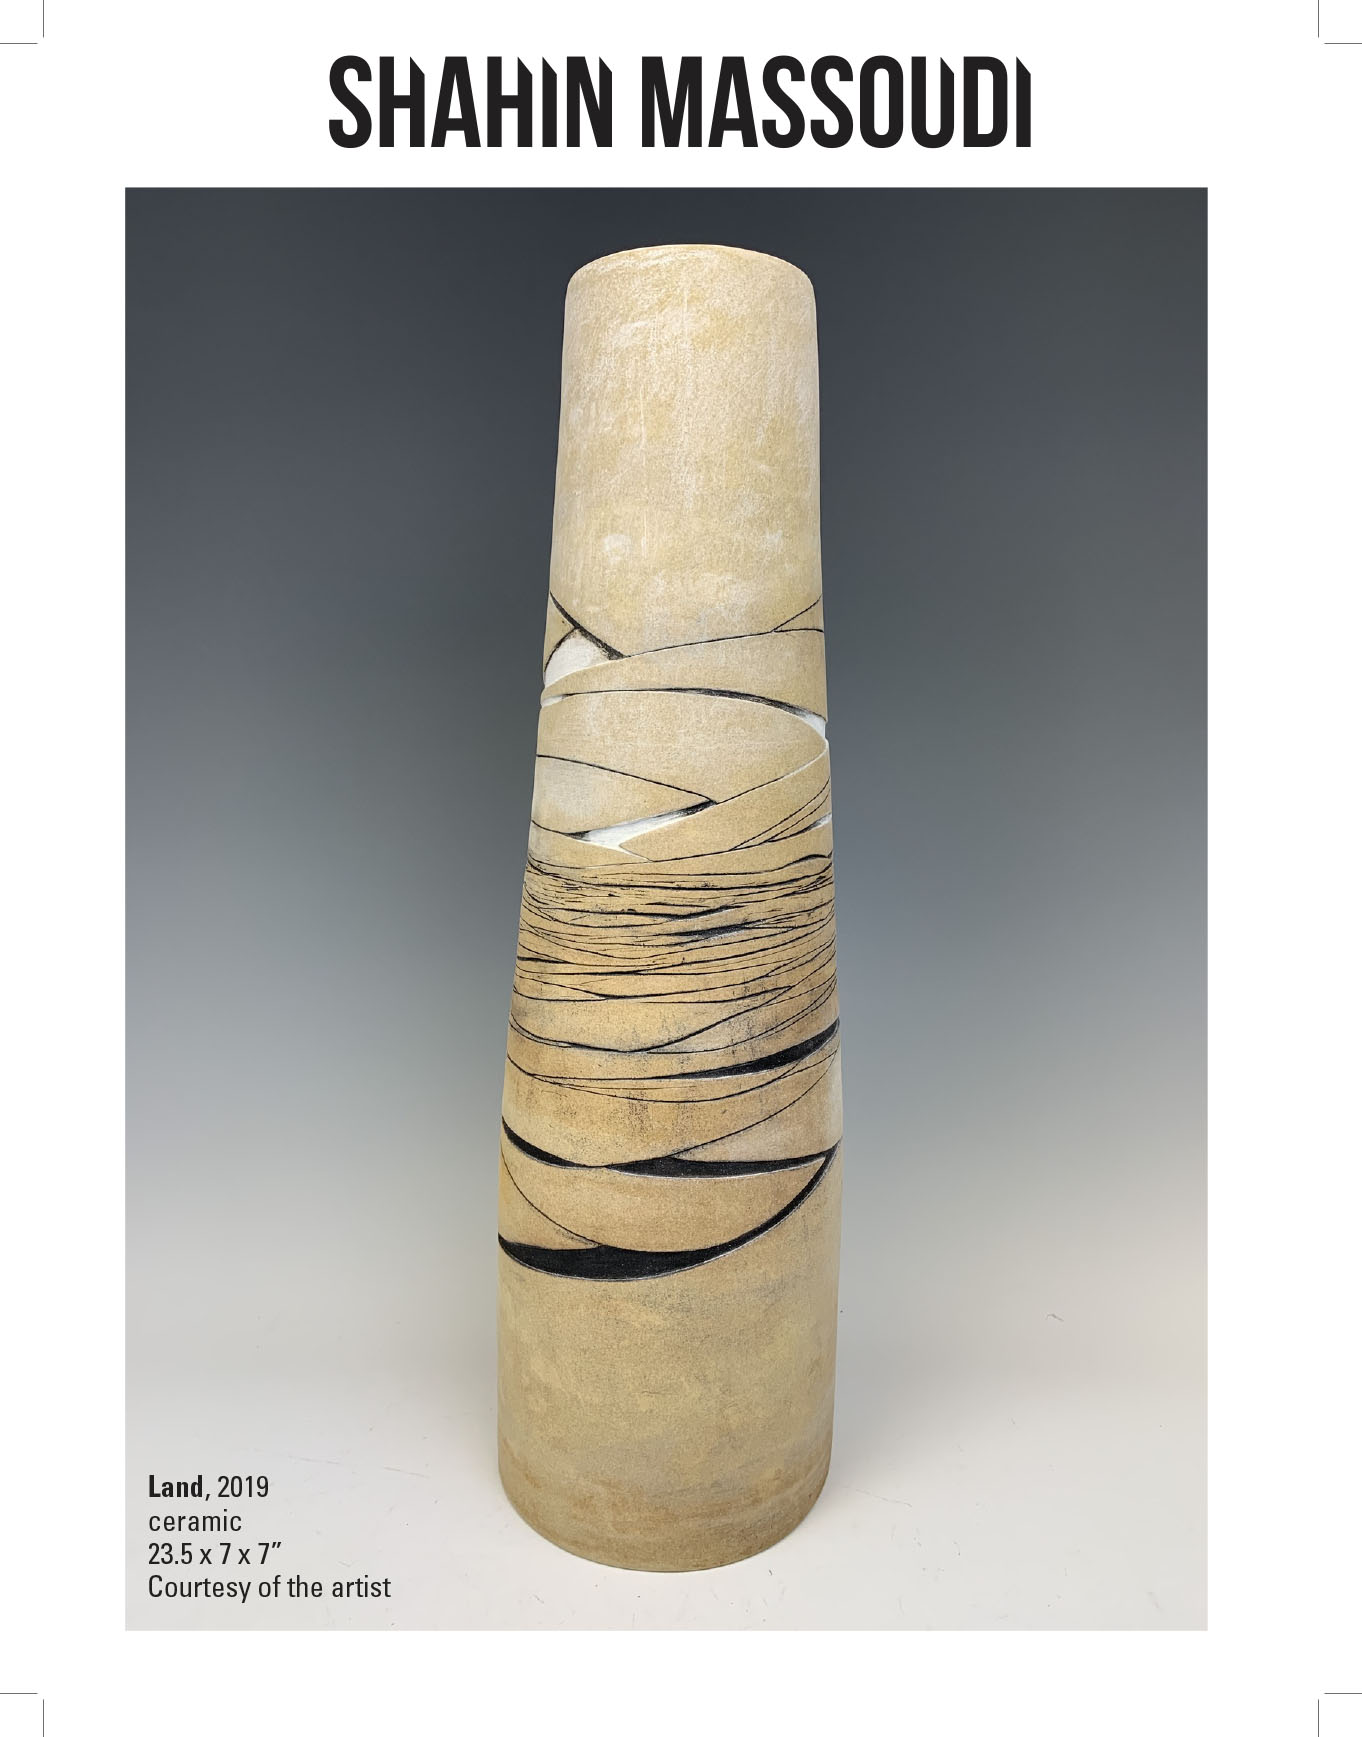 Shahin T. Massoudi, Land, 2019. Ceramic 23.5 x 7 x 7” Courtesy of the artist. A sculpture of a vertical vessel with lines along the middle section